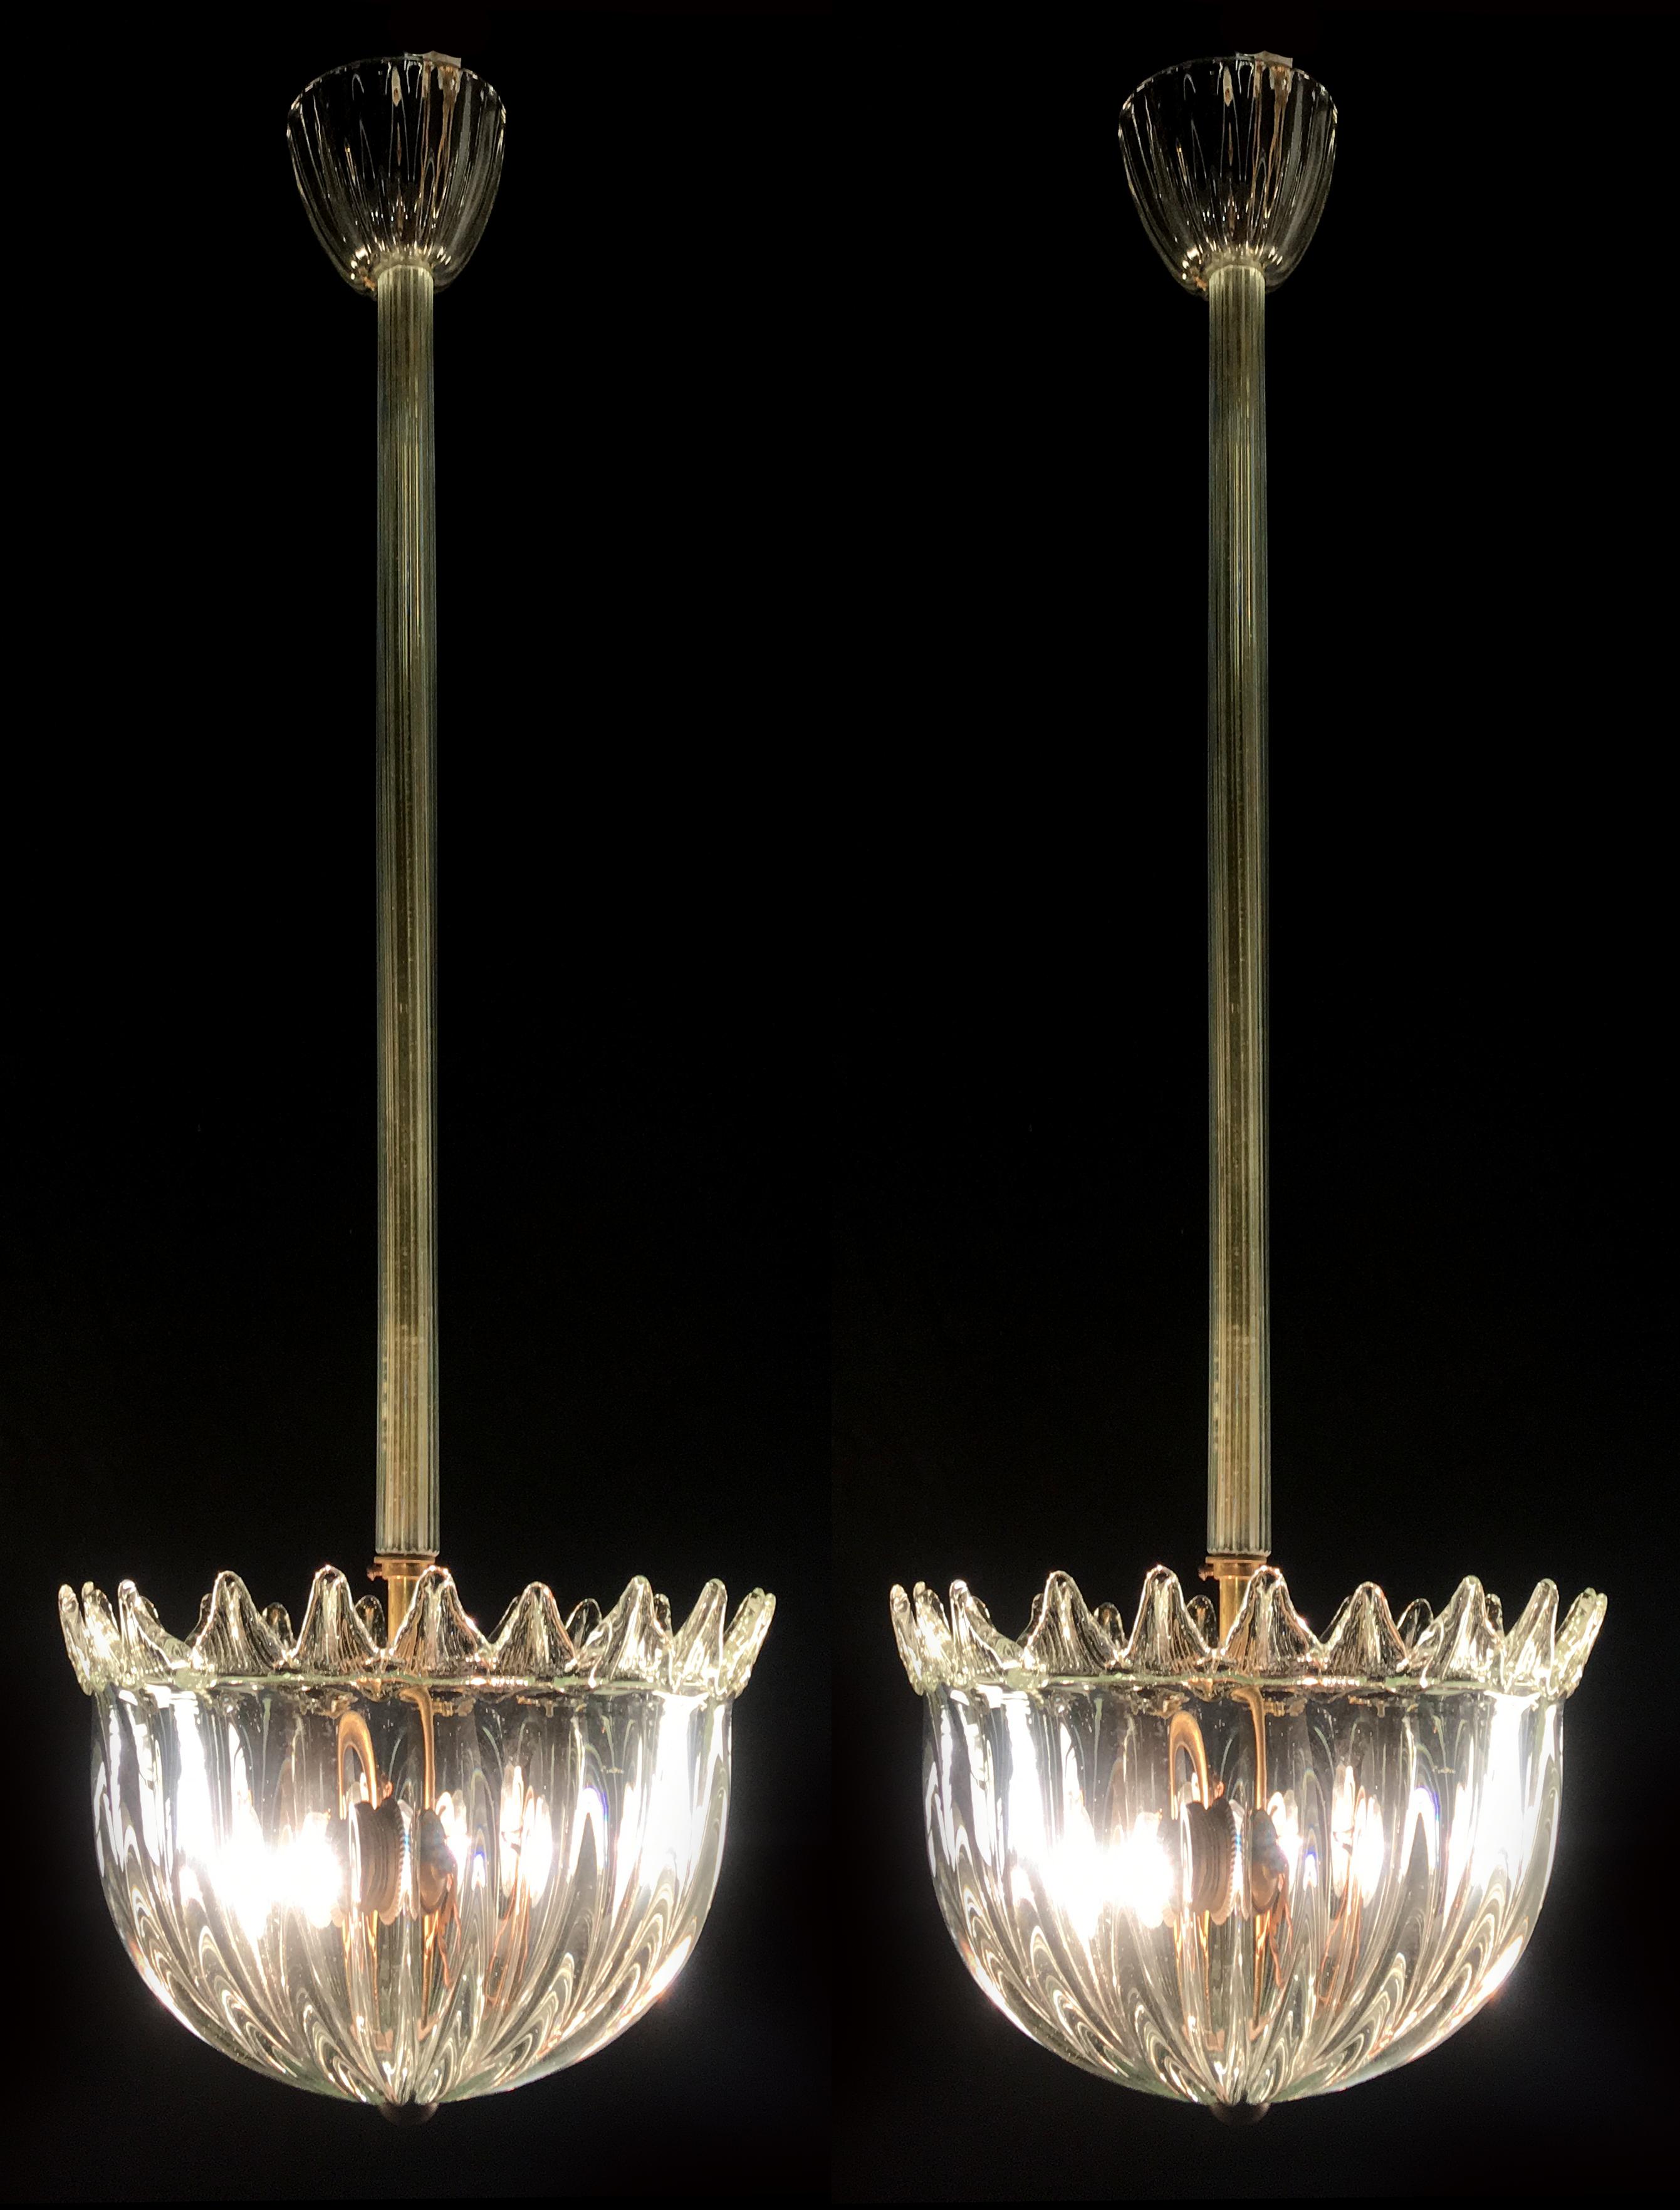 Trio of lanterns of incredible beauty in massive Murano glass with inclusions of gold.